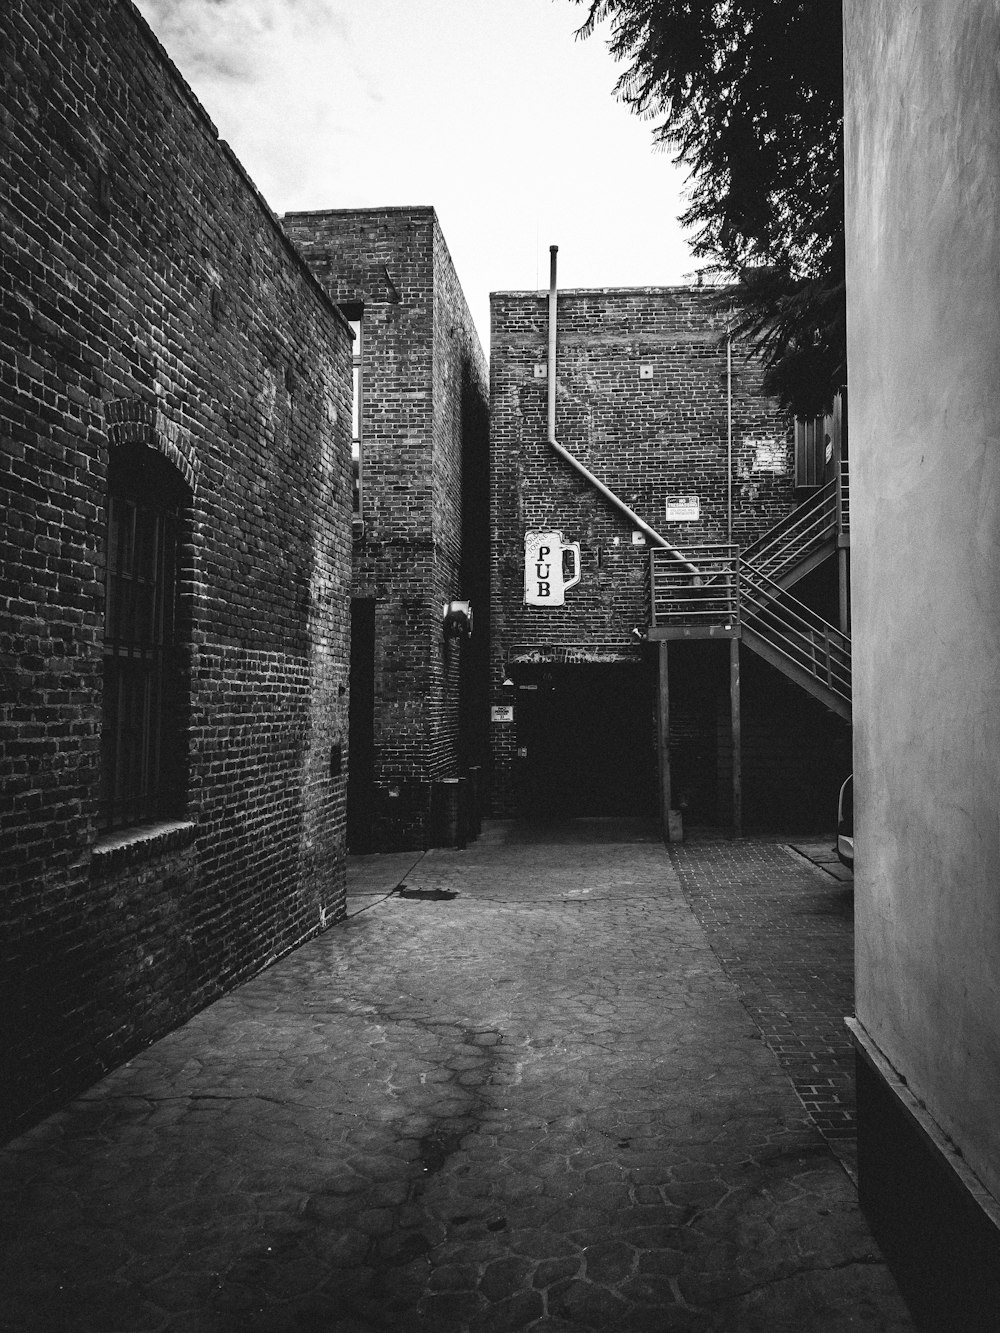 grayscale photography of alley with brick buildings